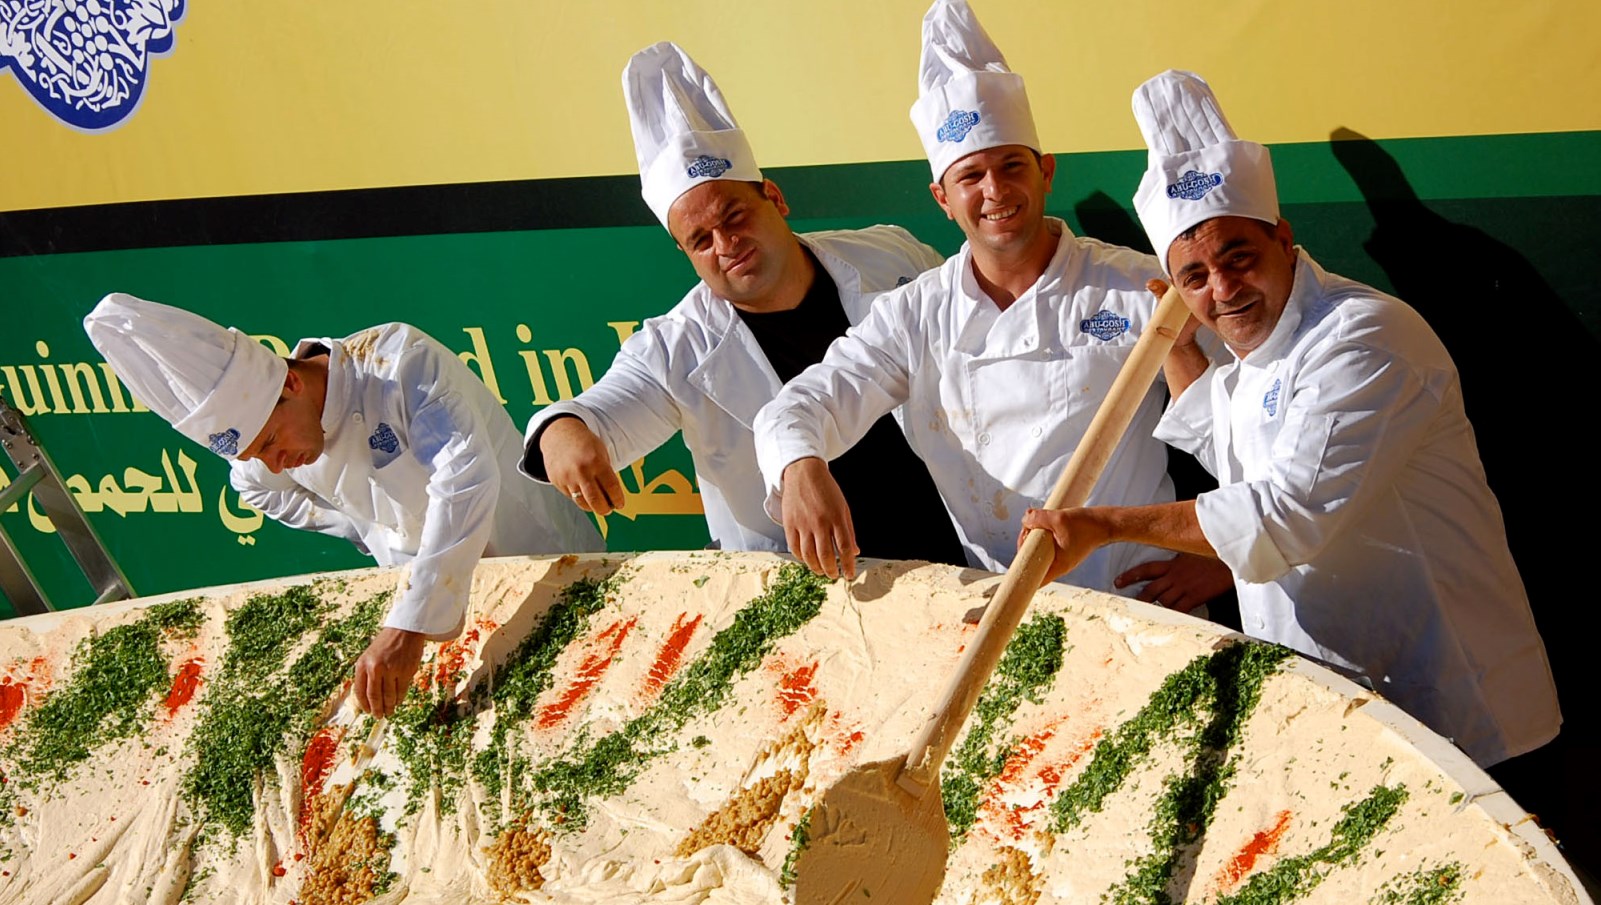 The Abu Ghosh restaurant prepares a 4-ton bowl of hummus in an attempt to set out a Guinness World Records title in 2010. Photo by Rachael Cerrotti/FLASH90